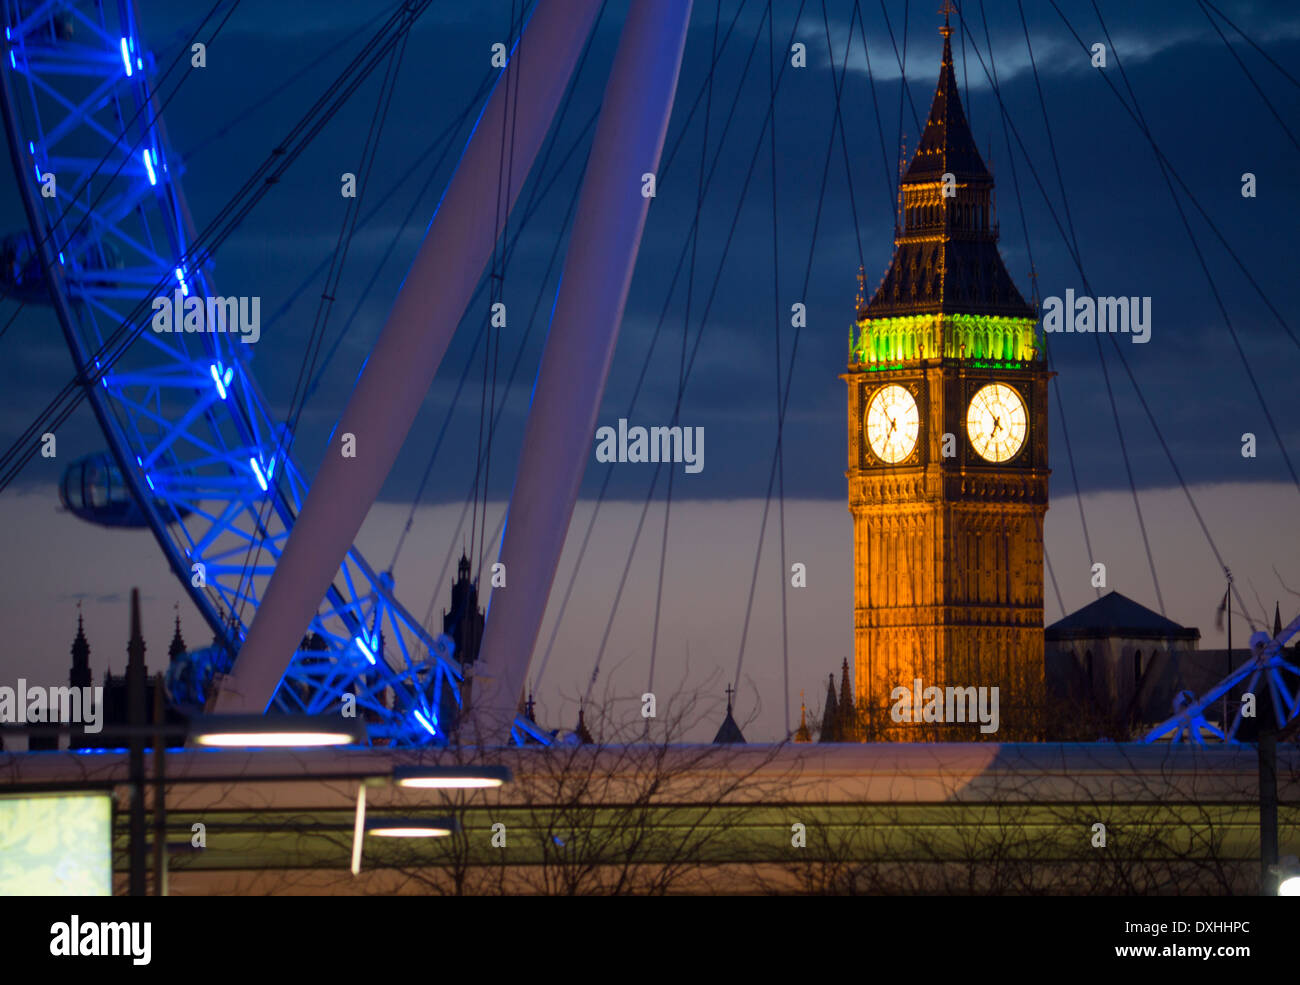 Big Ben Clock Tower of Houses of Parliament and Millennium Wheel or London Eye at dusk London England UK Stock Photo